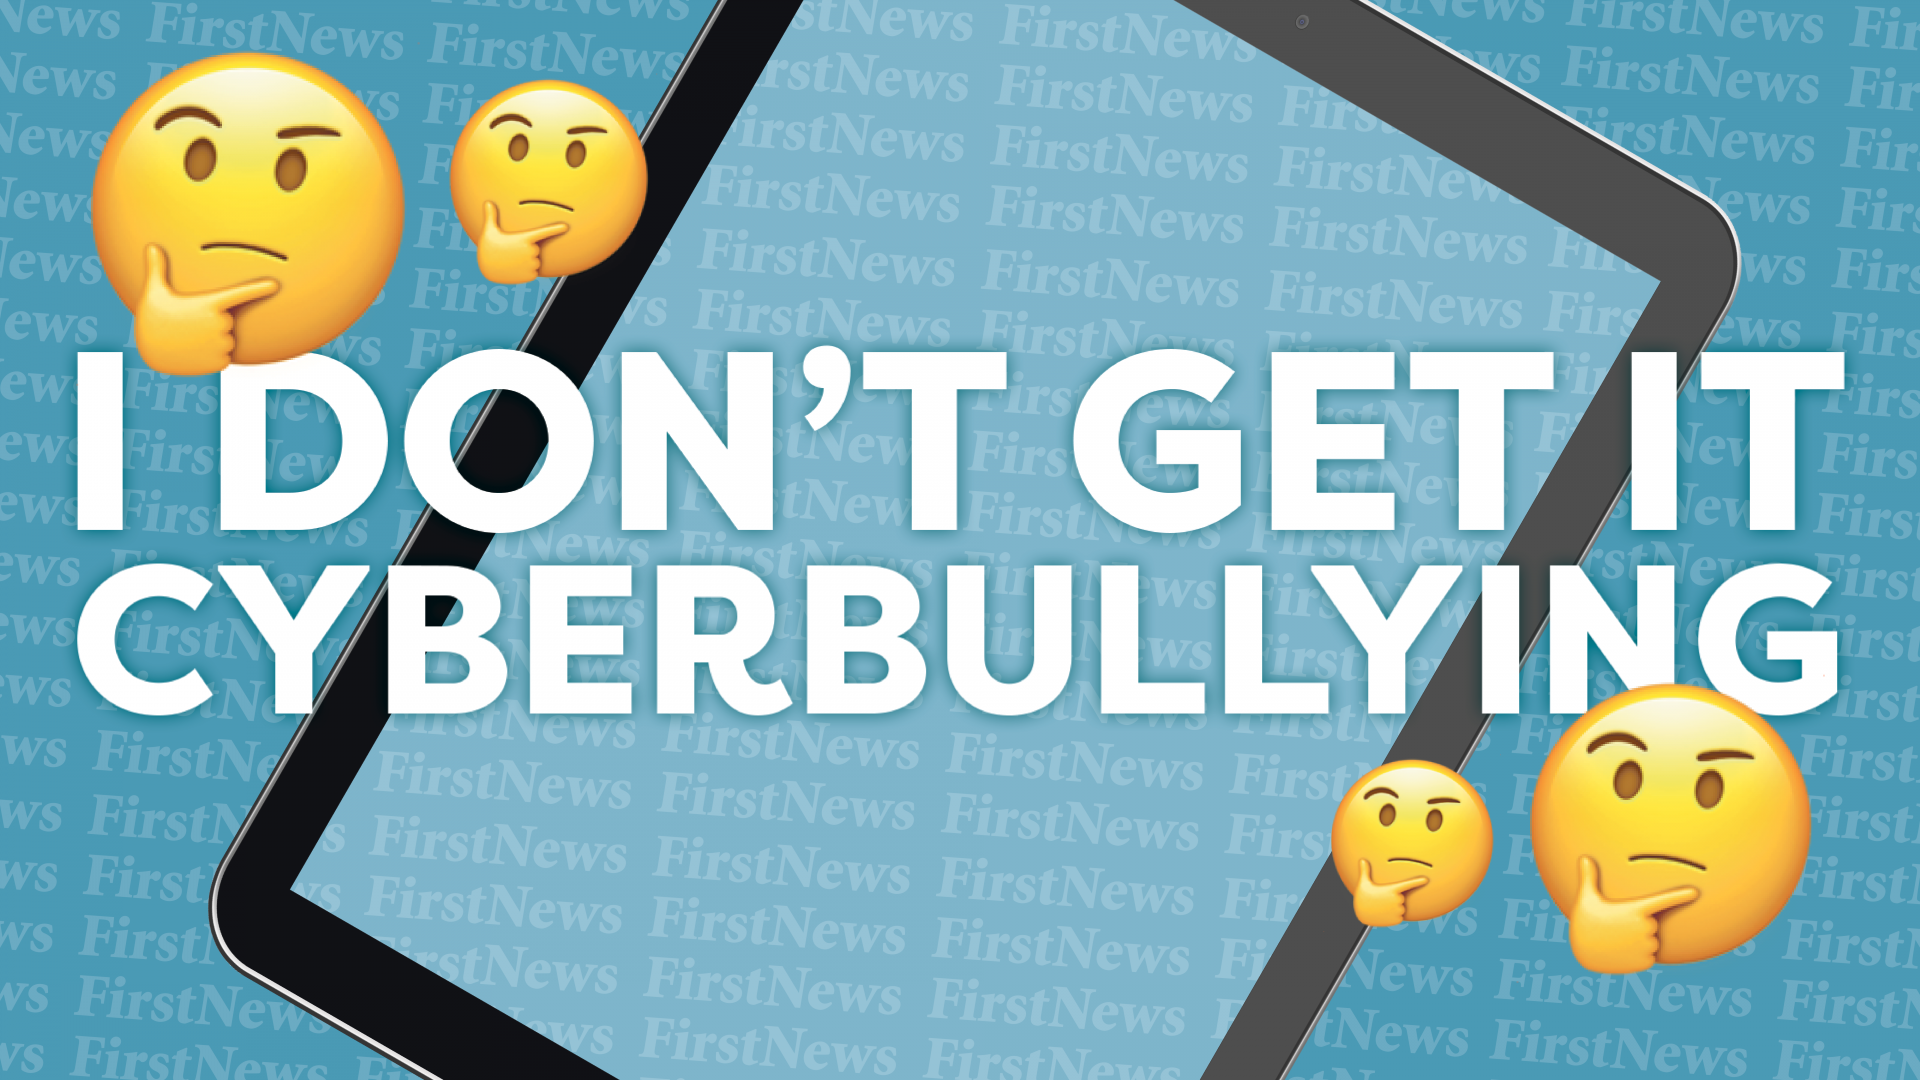 What is cyberbullying? How can I help stop it? - First News Live!